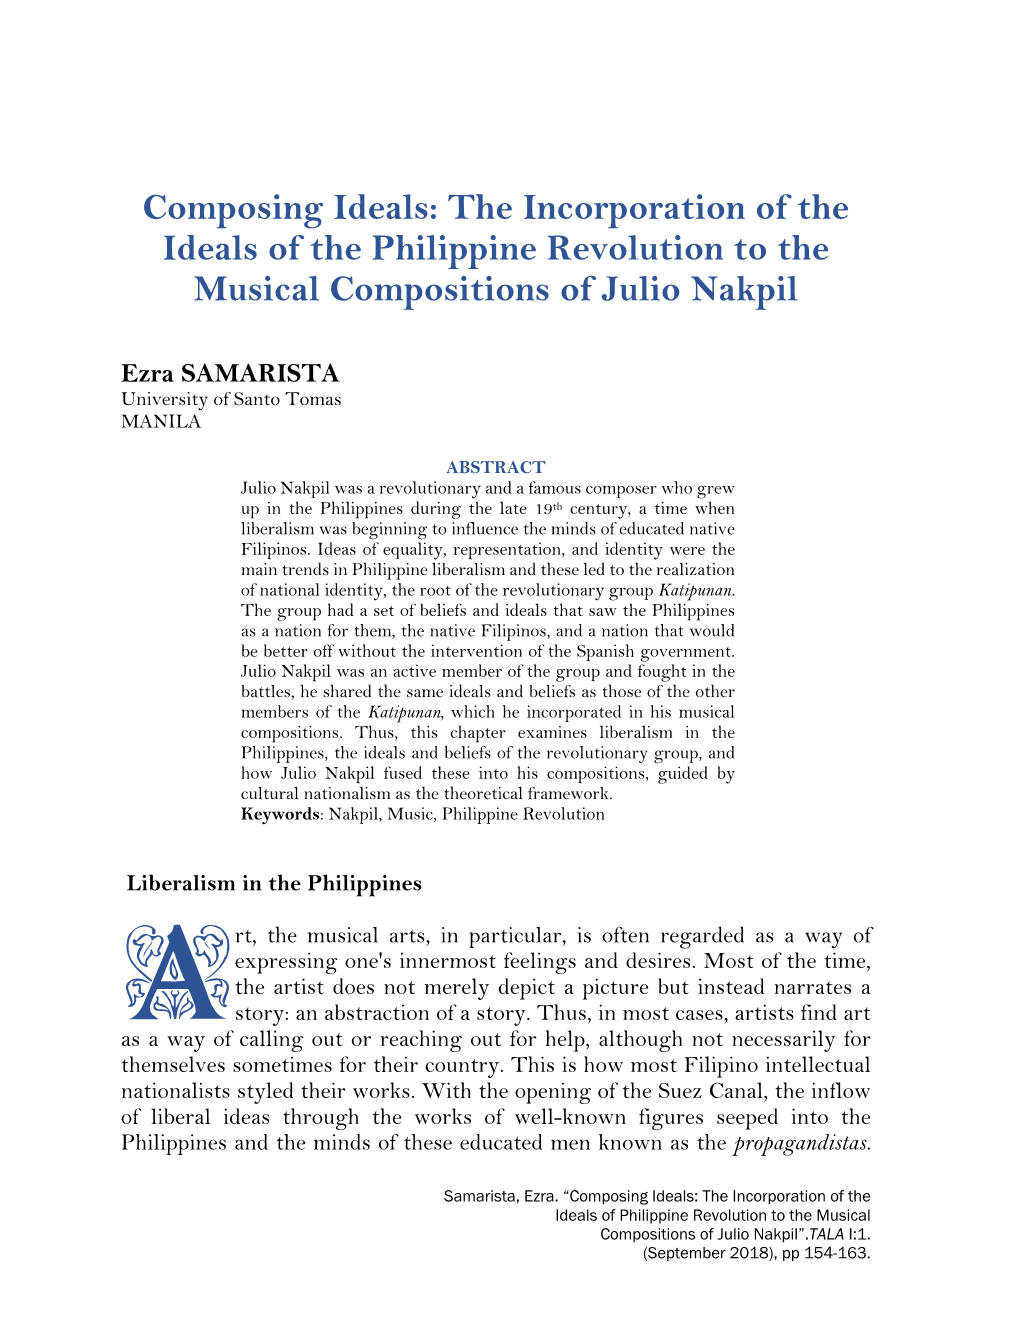 The Incorporation of the Ideals of the Philippine Revolution to the Musical Compositions of Julio Nakpil